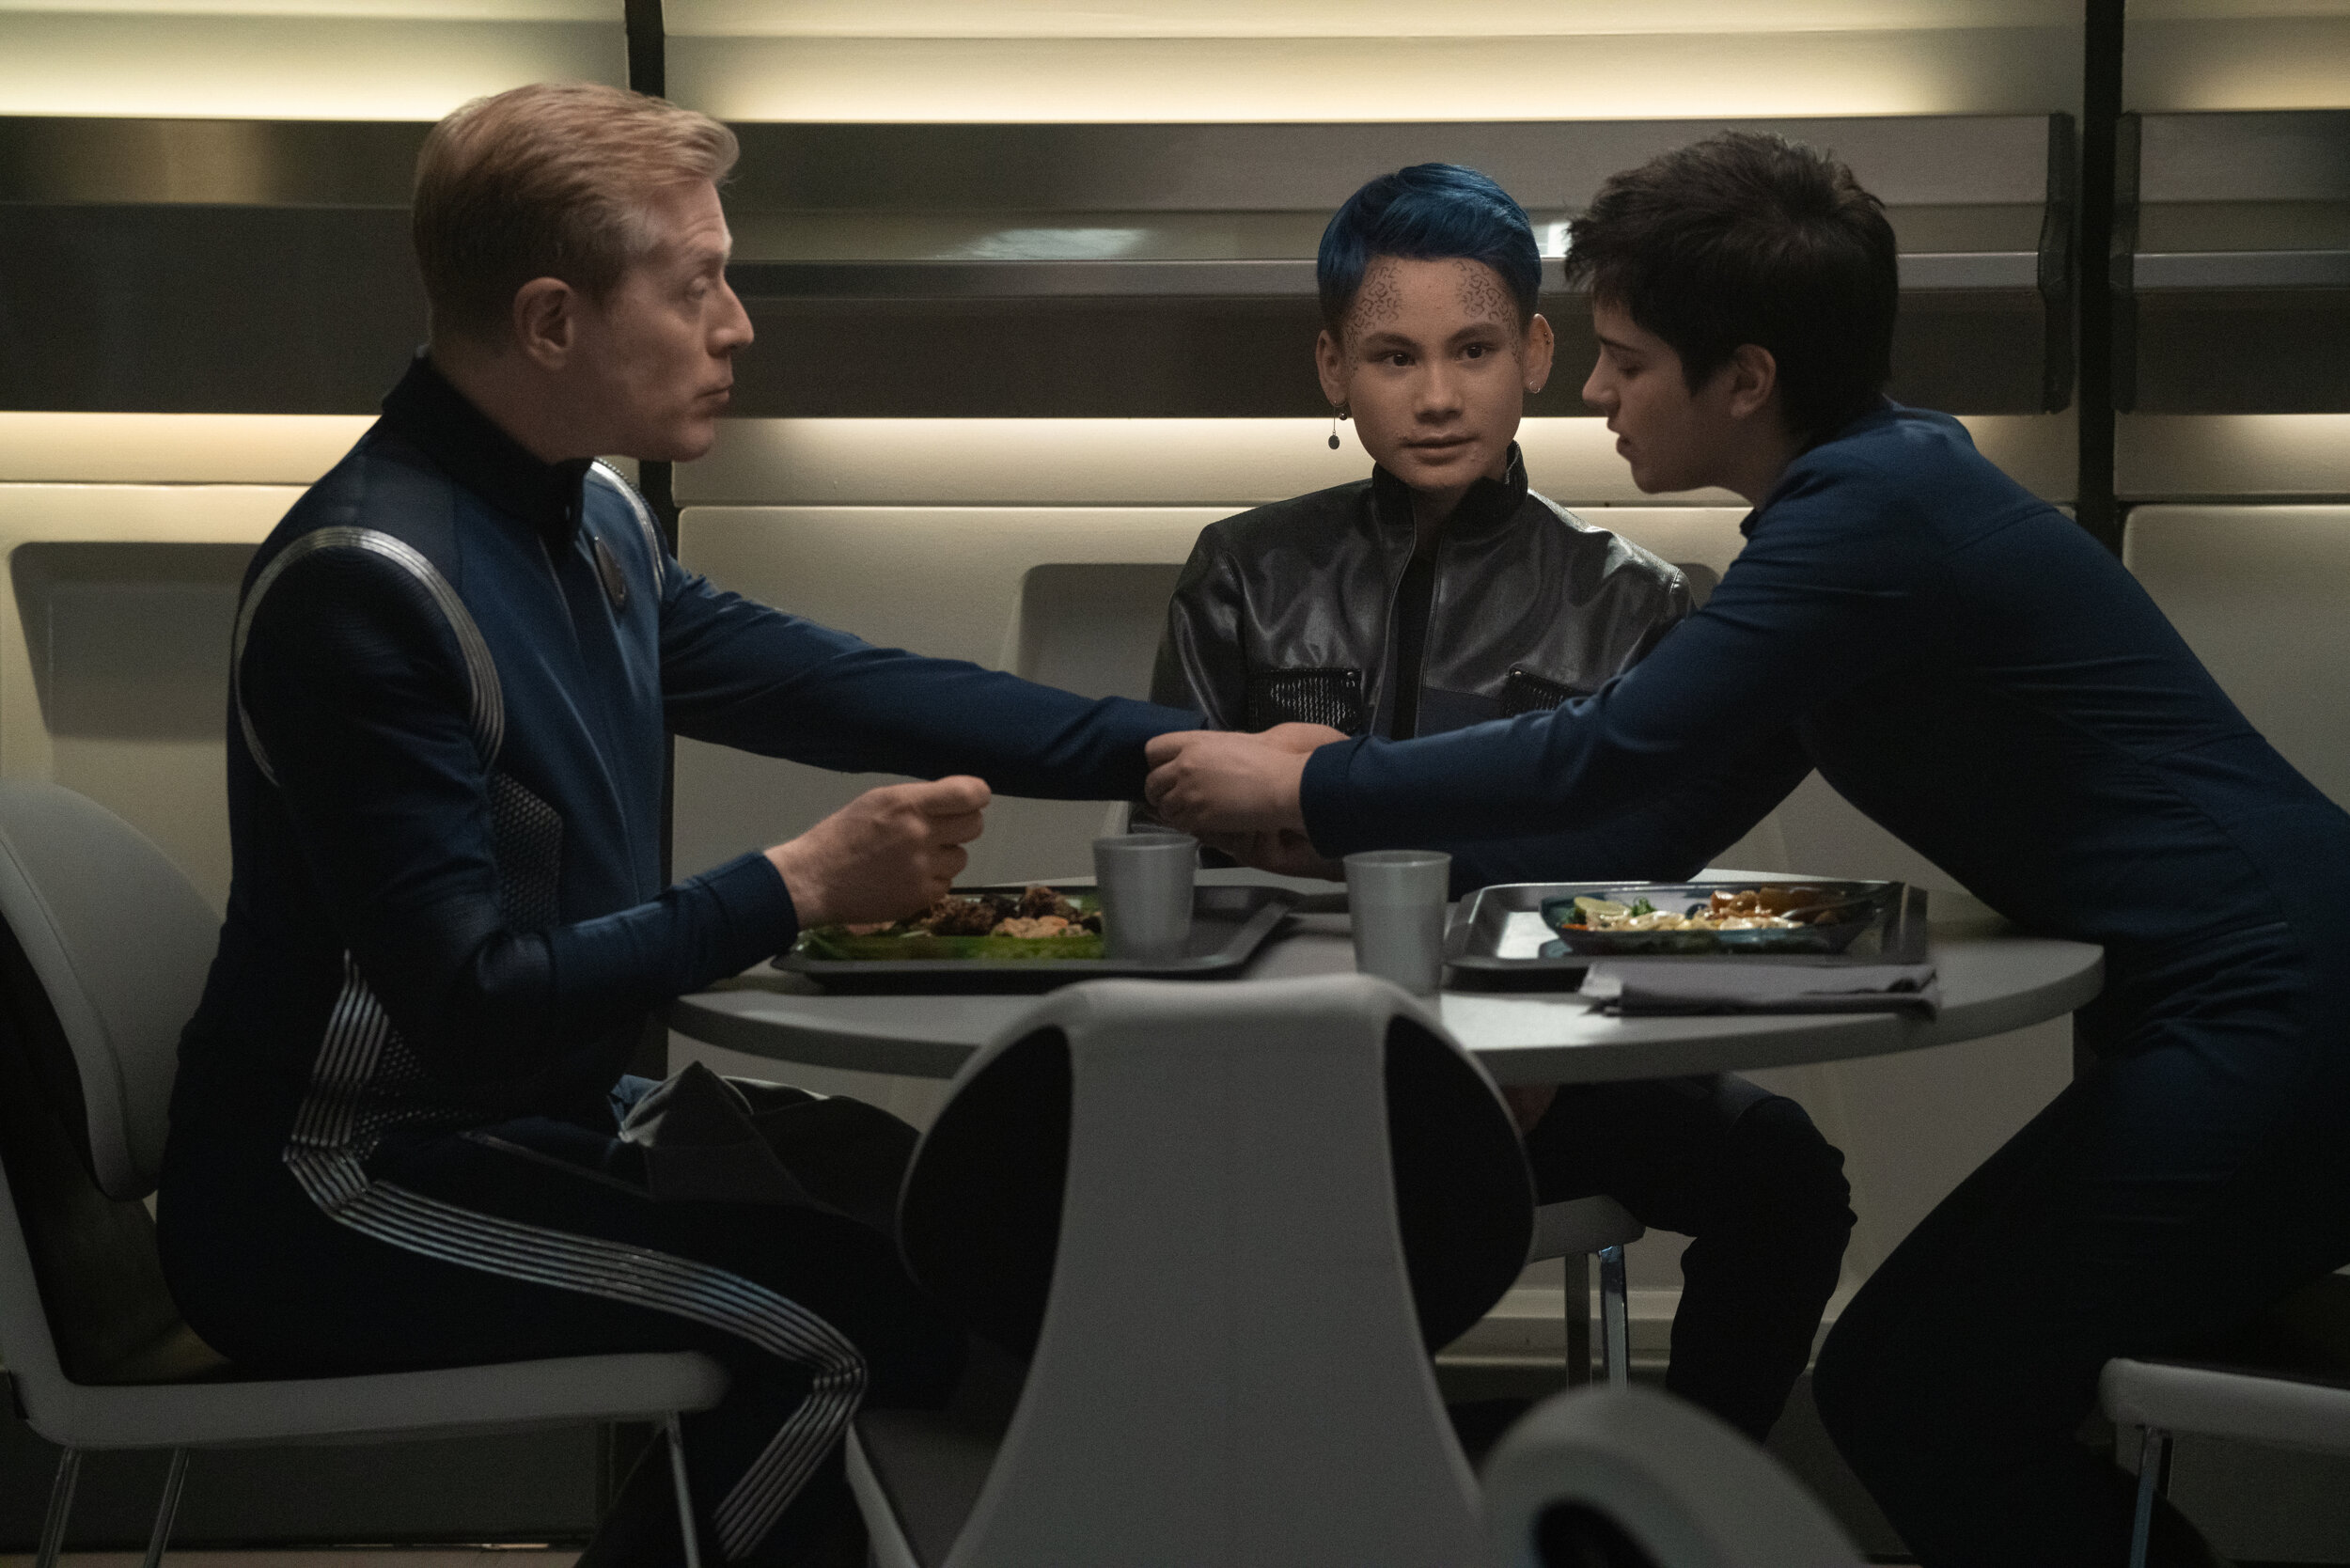   "Scavengers" -- Ep#306 -- Pictured: Anthony Rapp as Lt. Paul Stamets, Ian Alexander as Gray and Blu del Barrio as Adira of the CBS All Access series STAR TREK: DISCOVERY. Photo Cr: Michael Gibson/CBS ©2020 CBS Interactive, Inc. All Rights Reserved.